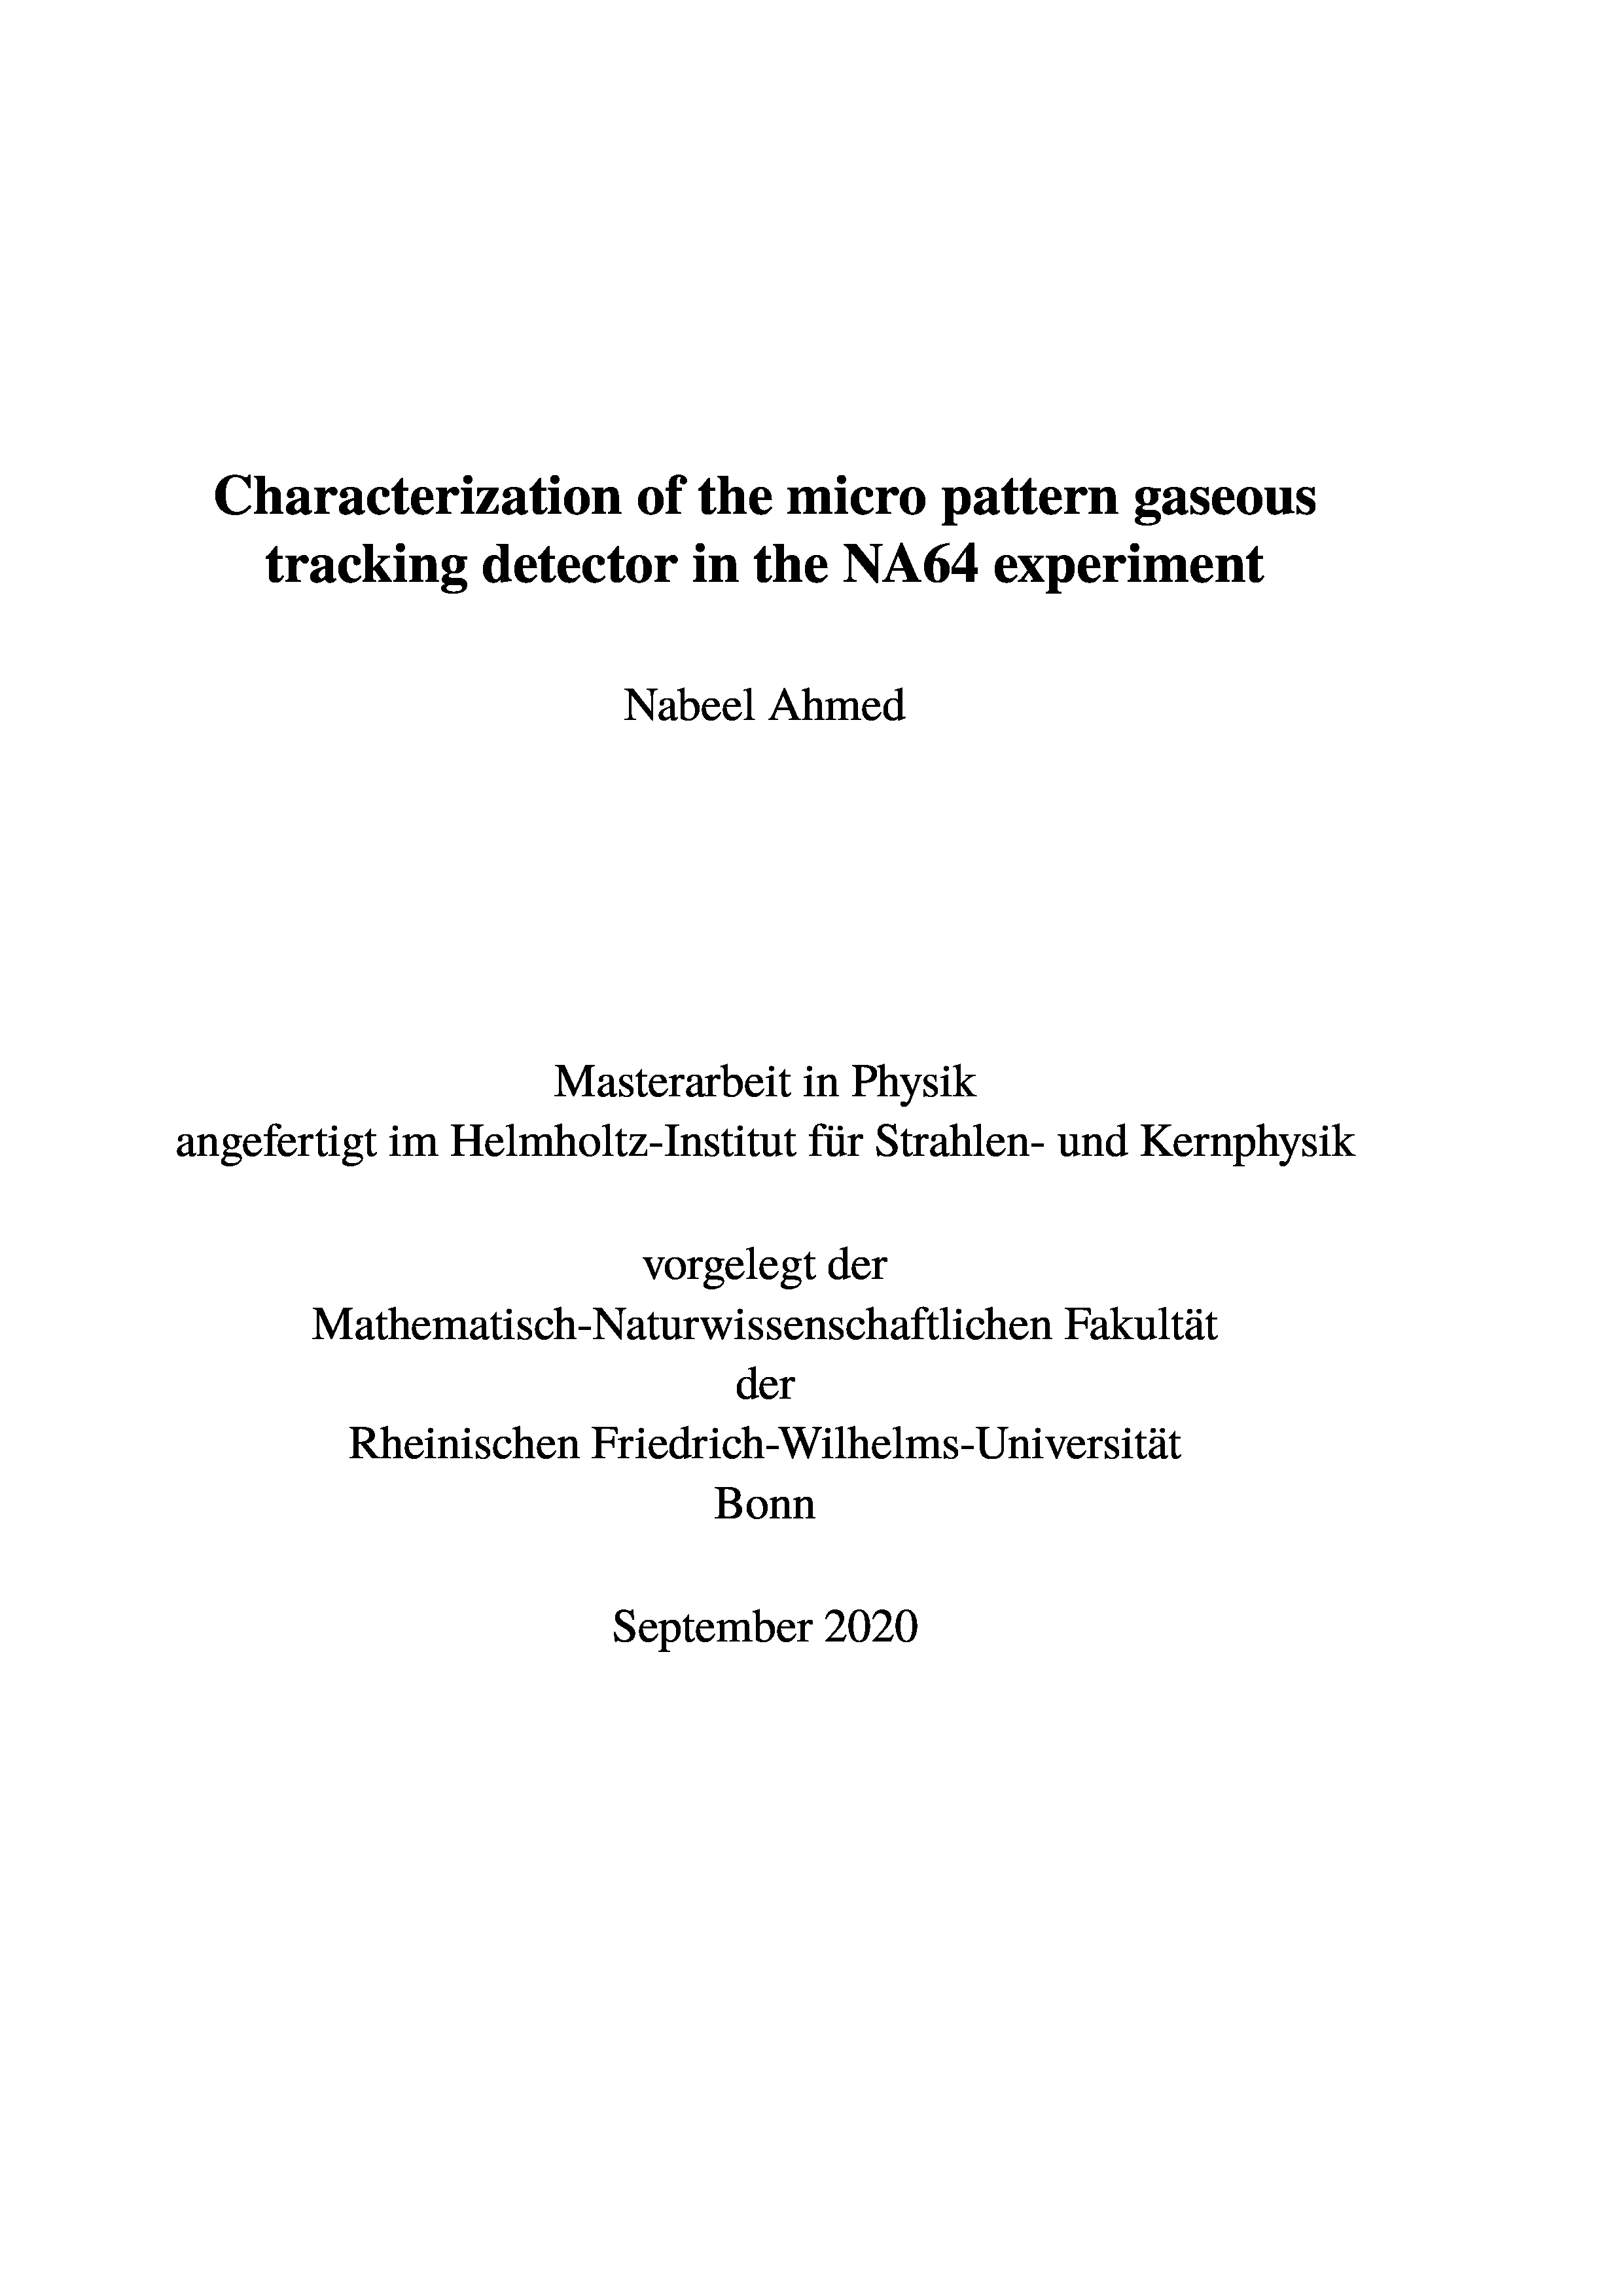 Characterization of the micro pattern gaseous tracking detector in the NA64 experiment